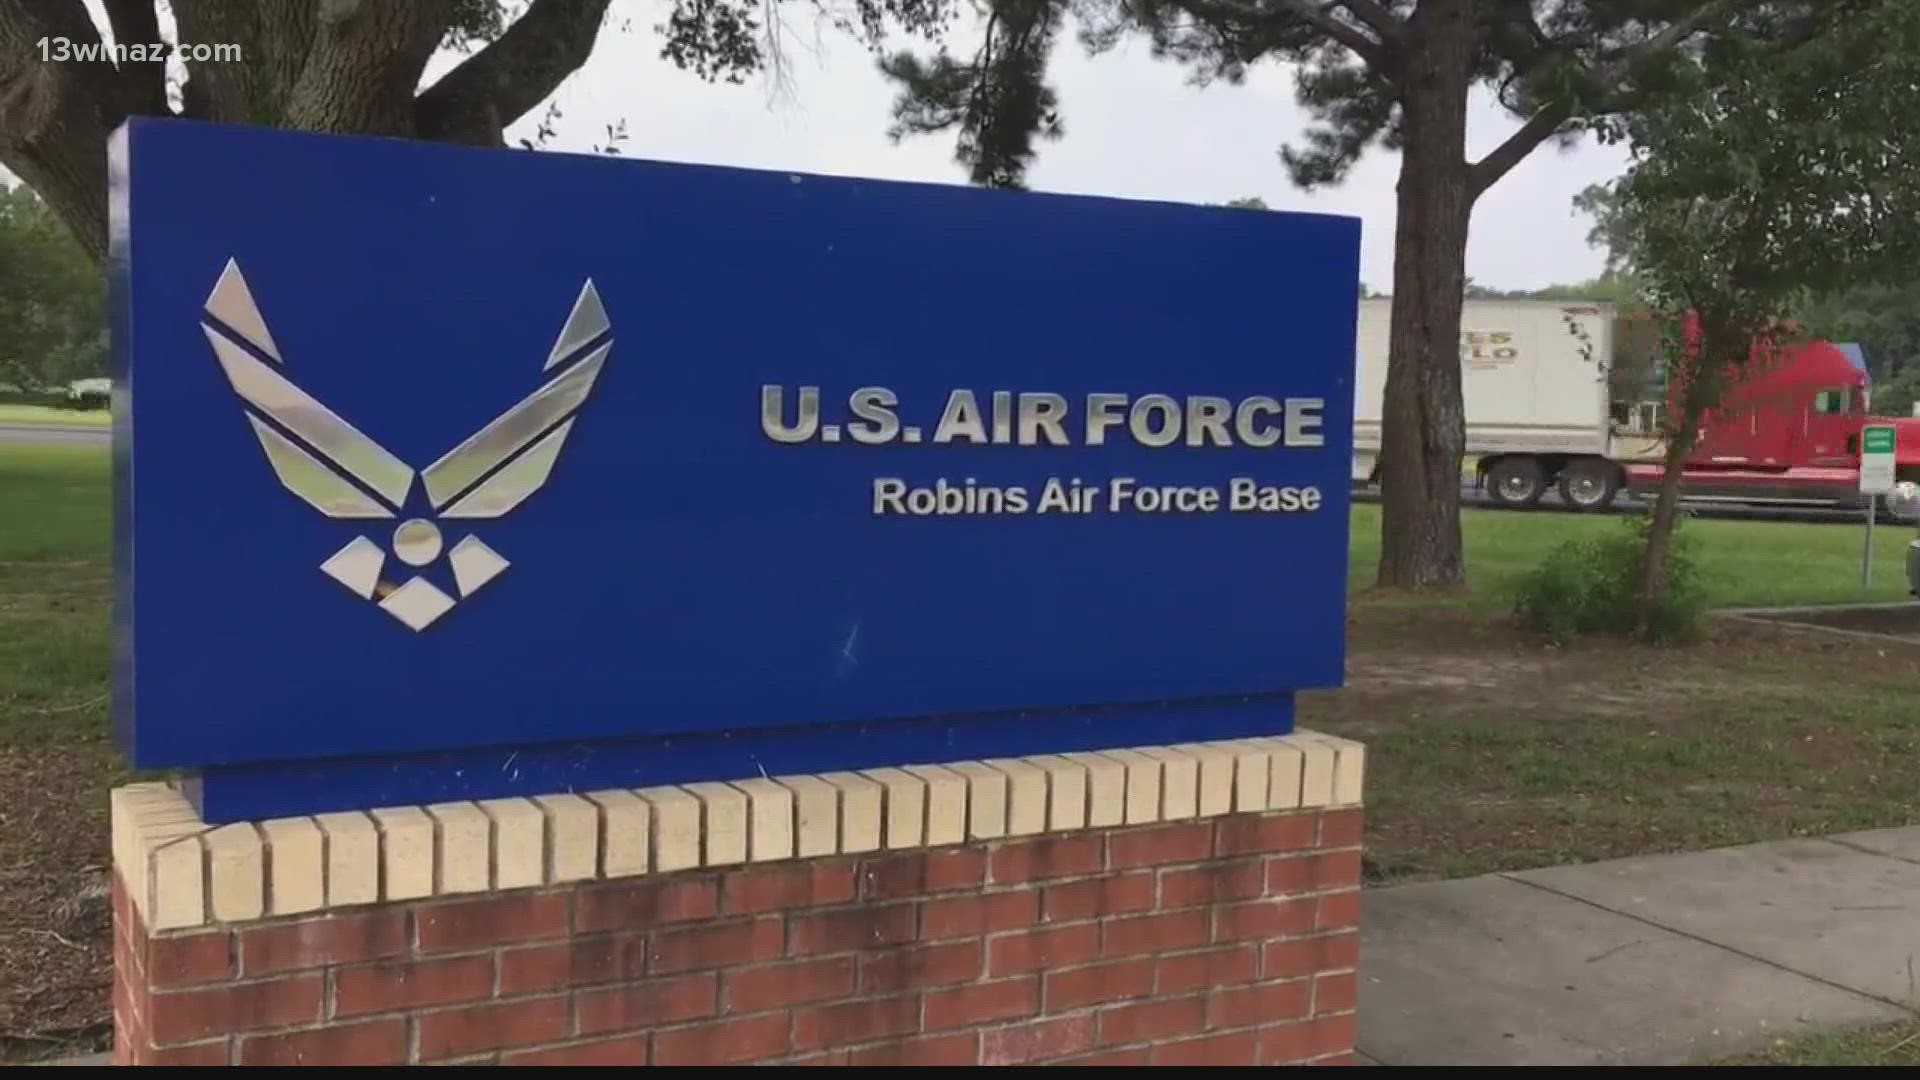 According to Roland Leach with Robins Air Force Base, officials are reviewing the order but do not have a timetable or plan for getting base employees vaccinated.